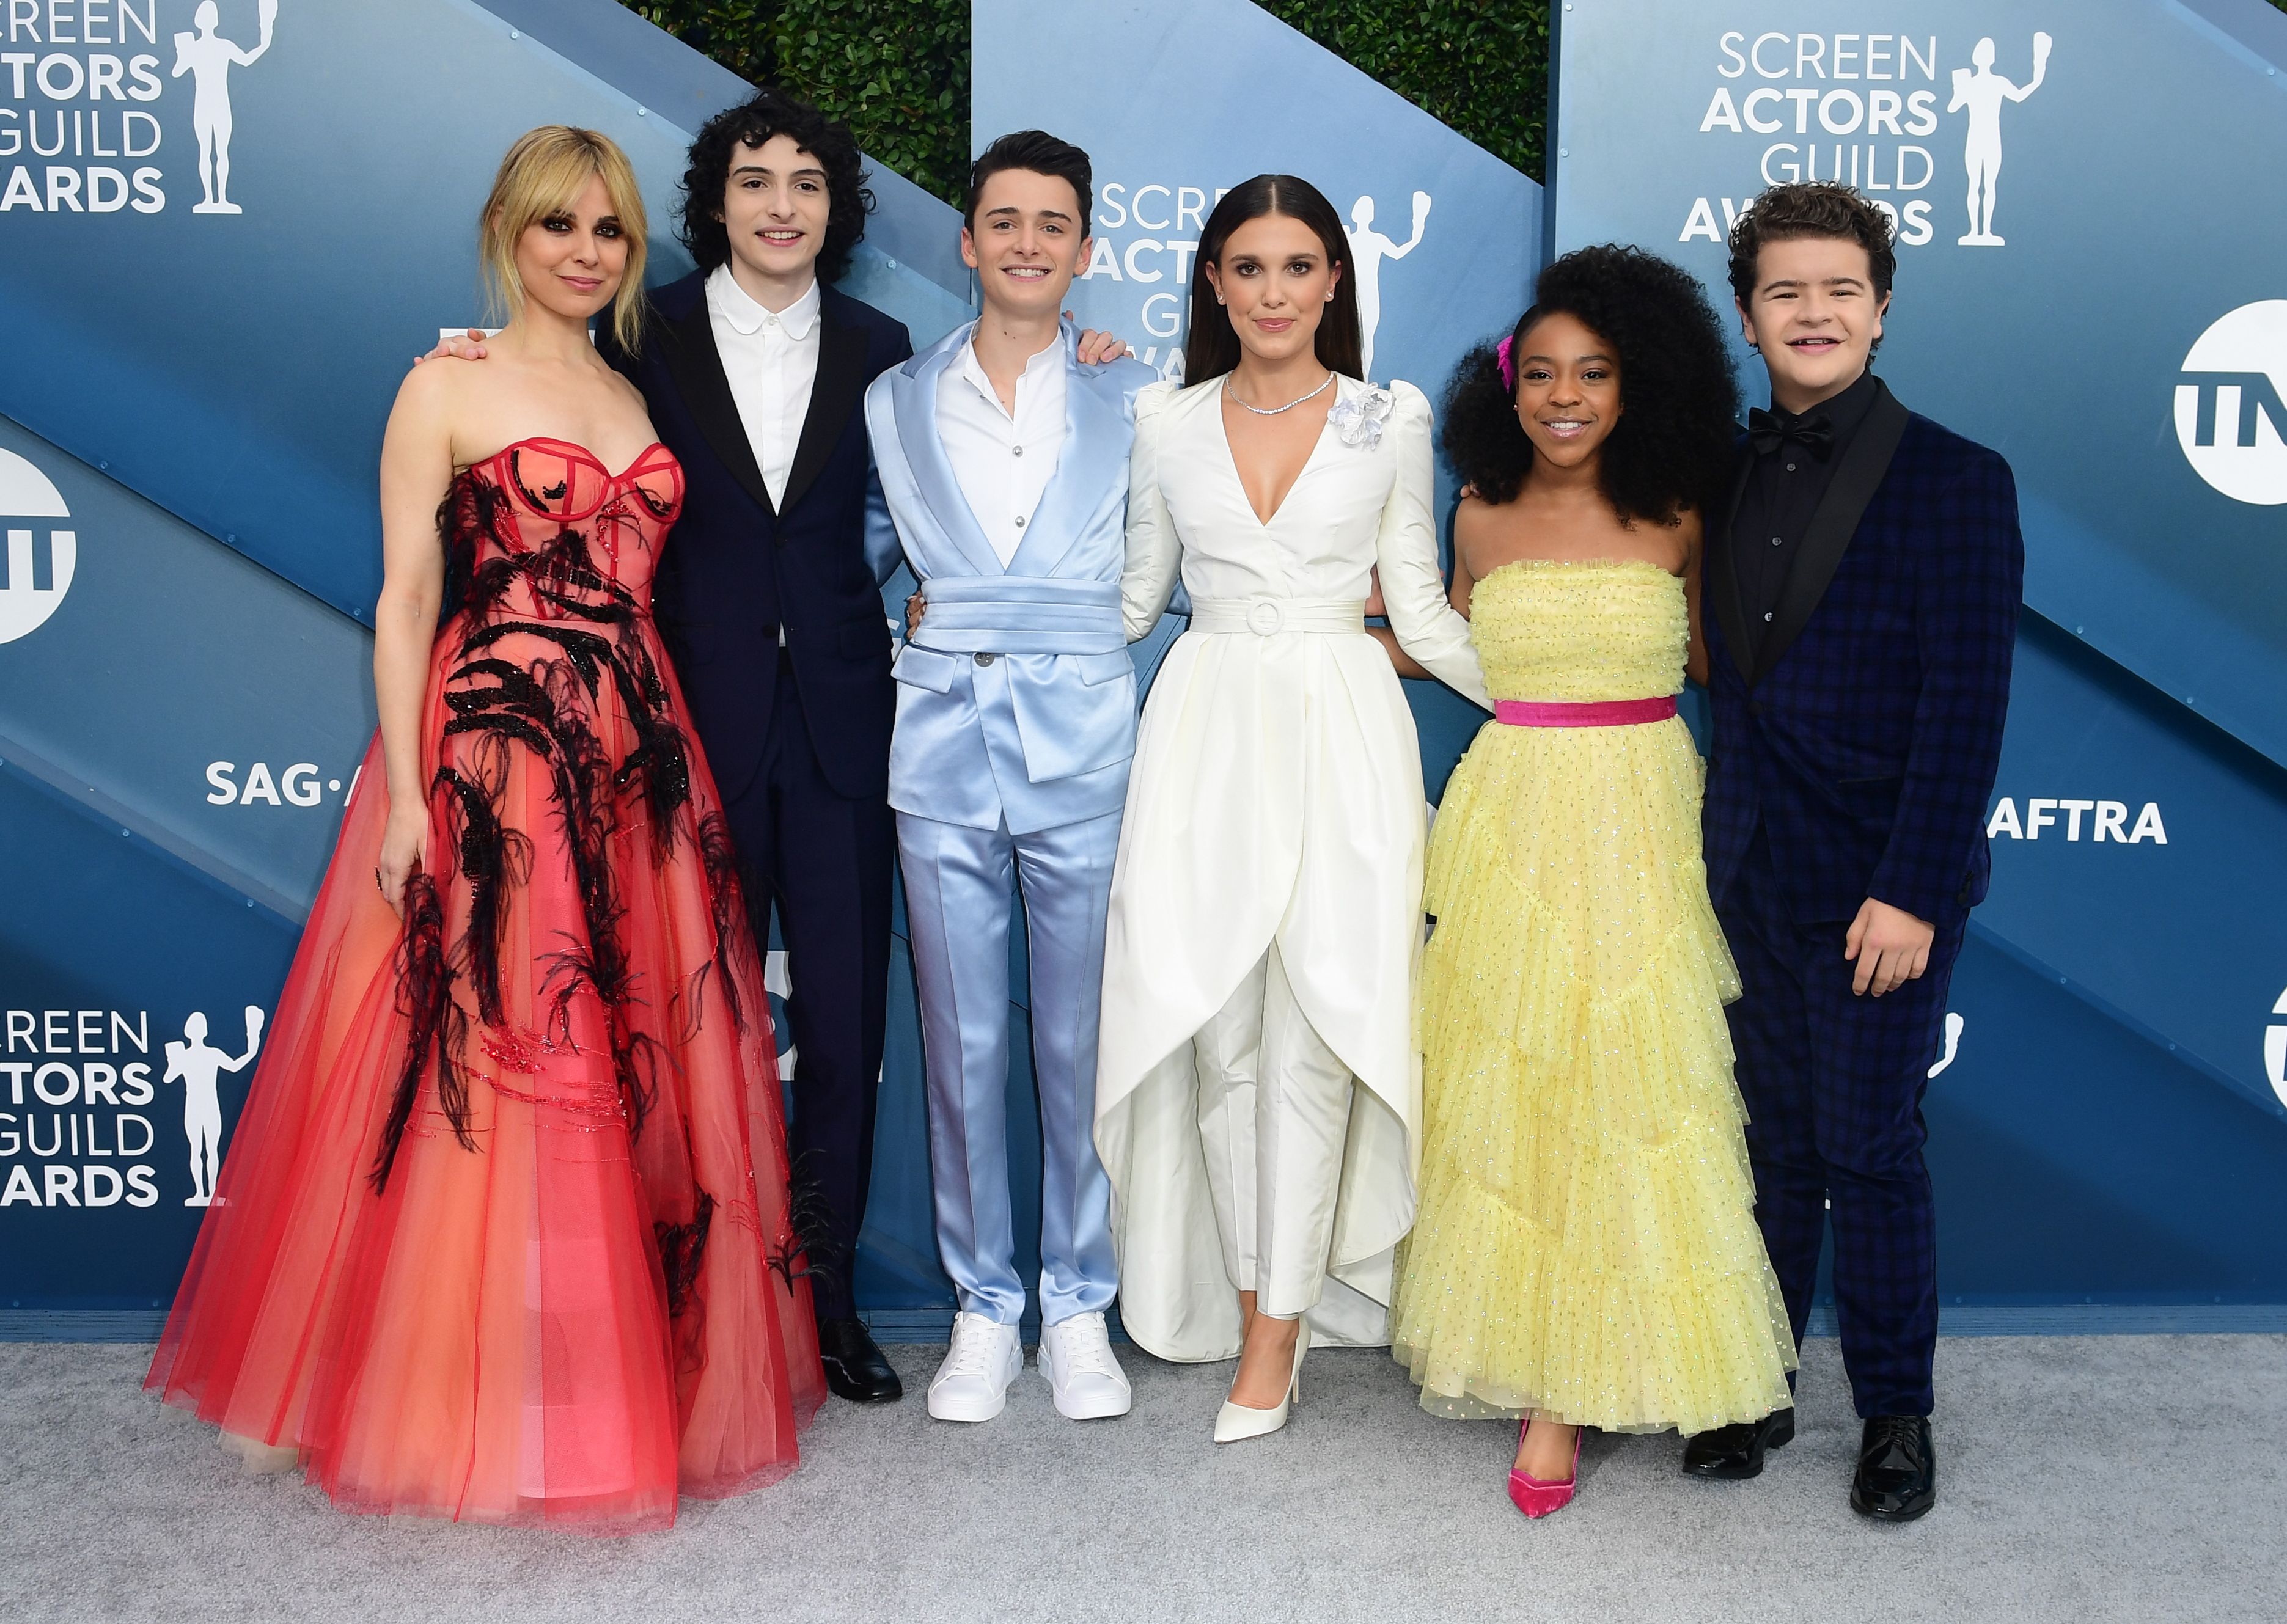 Millie Bobby Brown Attends SAG Awards in an '80s Wedding Dress